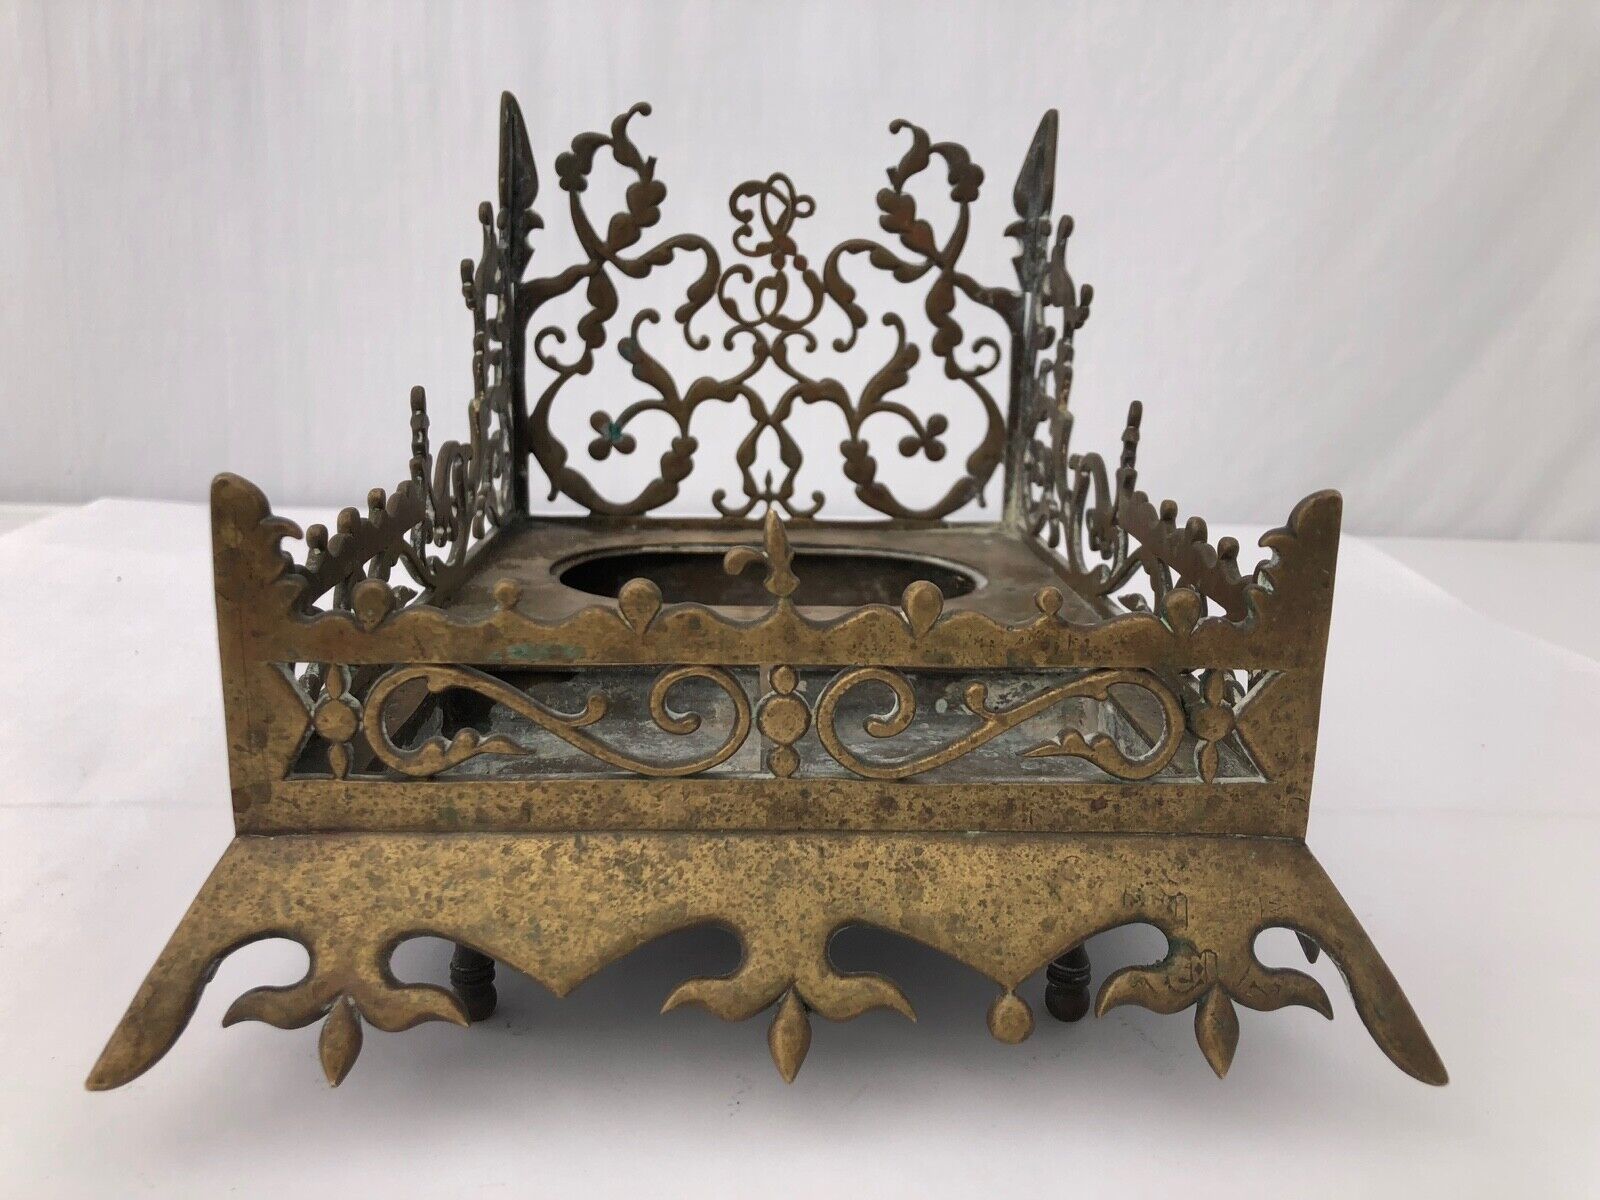 Intricately Crafted Brass Desk Inkwell Stand, Italian Dated August 18, 1911